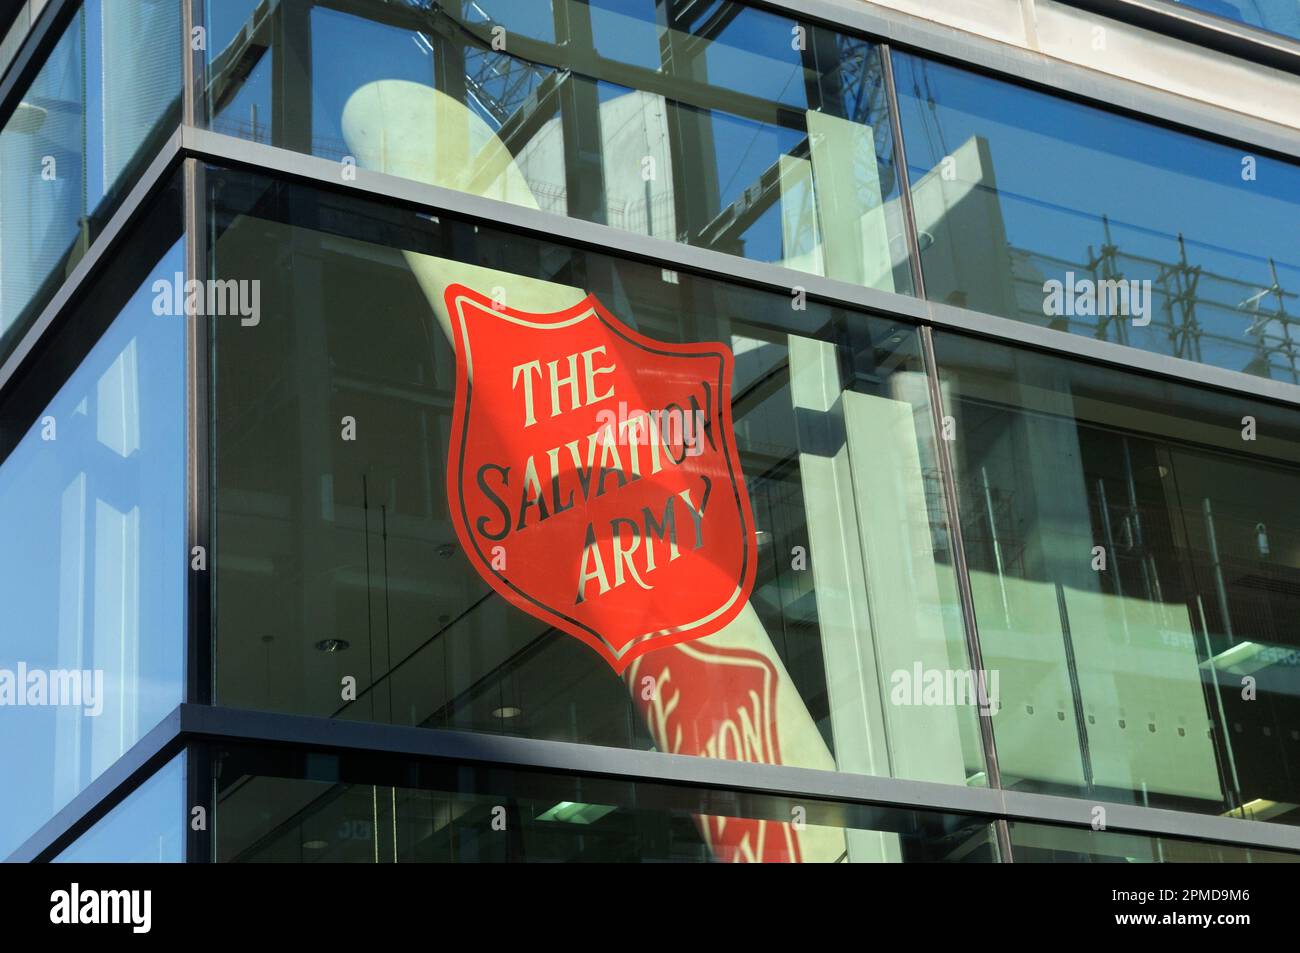 The Salvation Army International Headquarters in London, England, UK.  Protestant Christian church and international charitable organization. Stock Photo